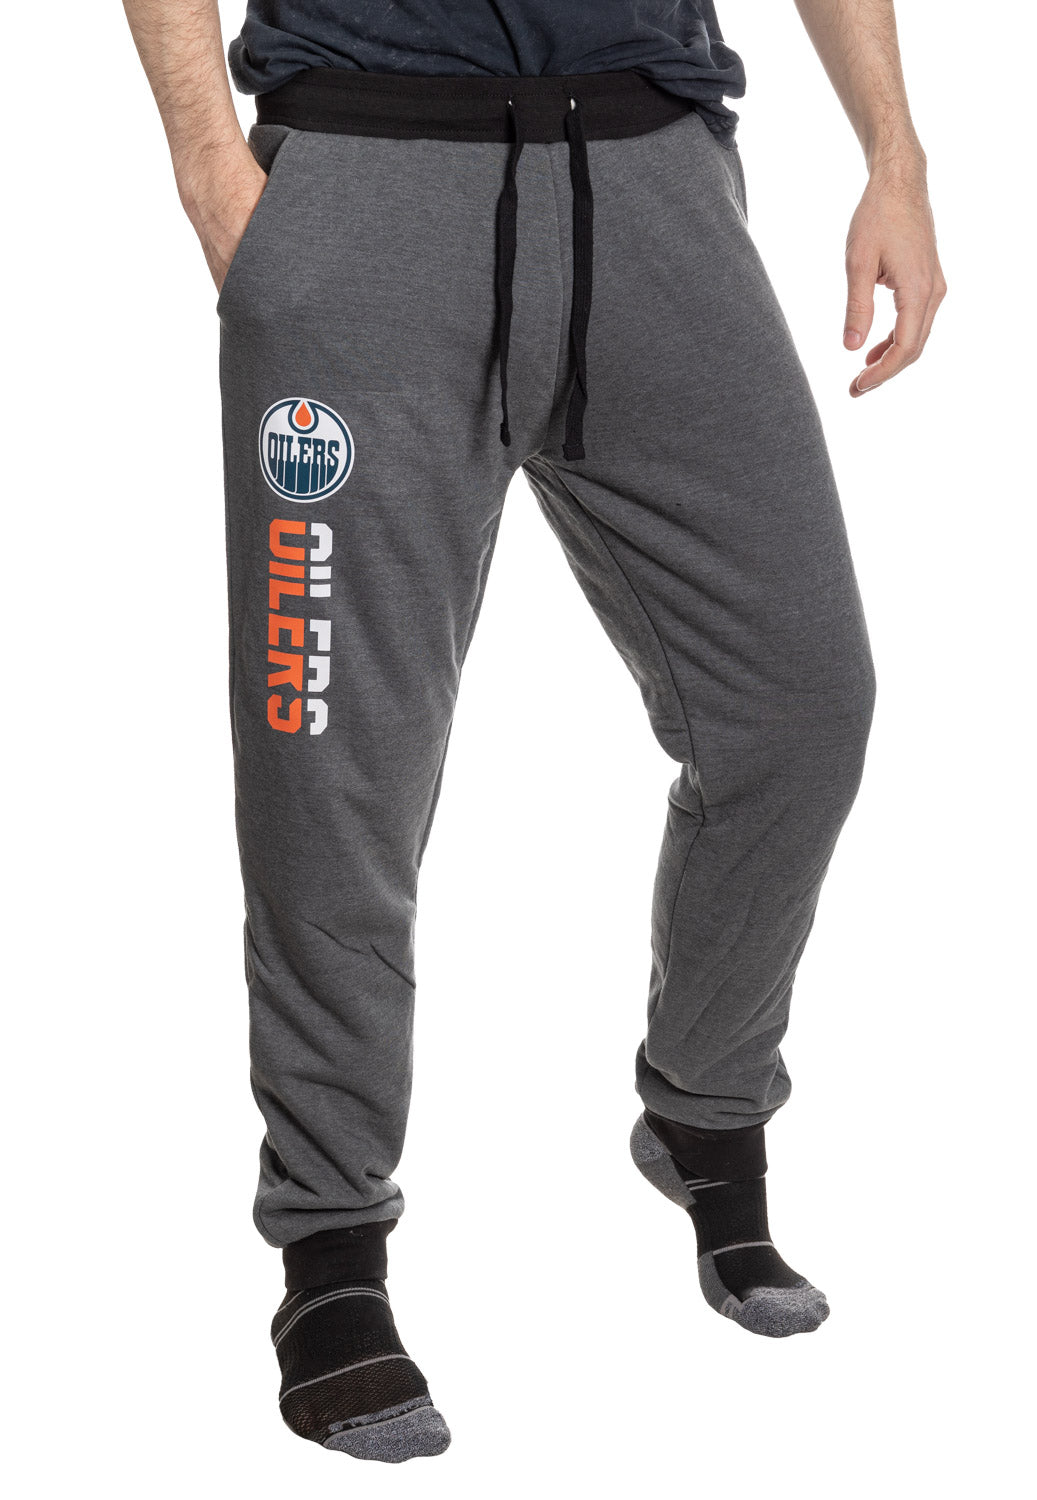 Edmonton Oilers NHL Unisex Sherpa Lined Warm Sweatpants with Pockets